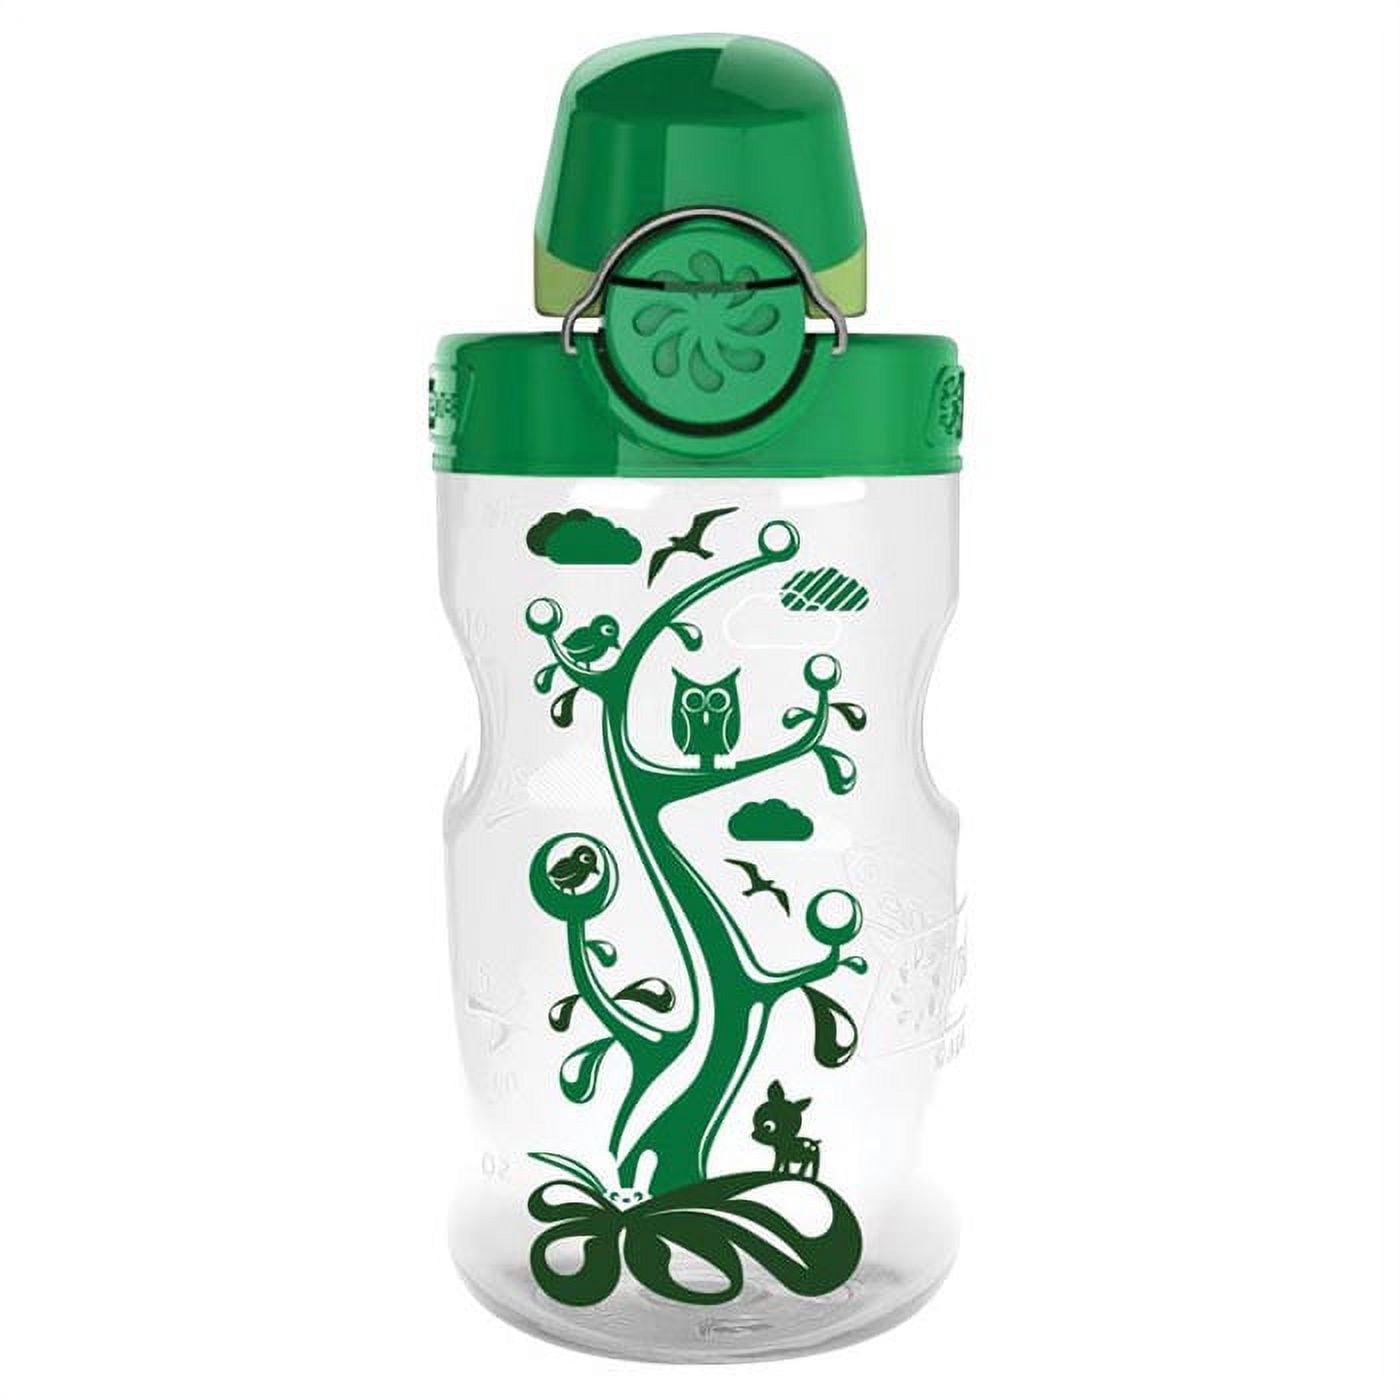 Nalgene 342661 on The Fly Kids Sustain Bottle, Green with Sprout Cap